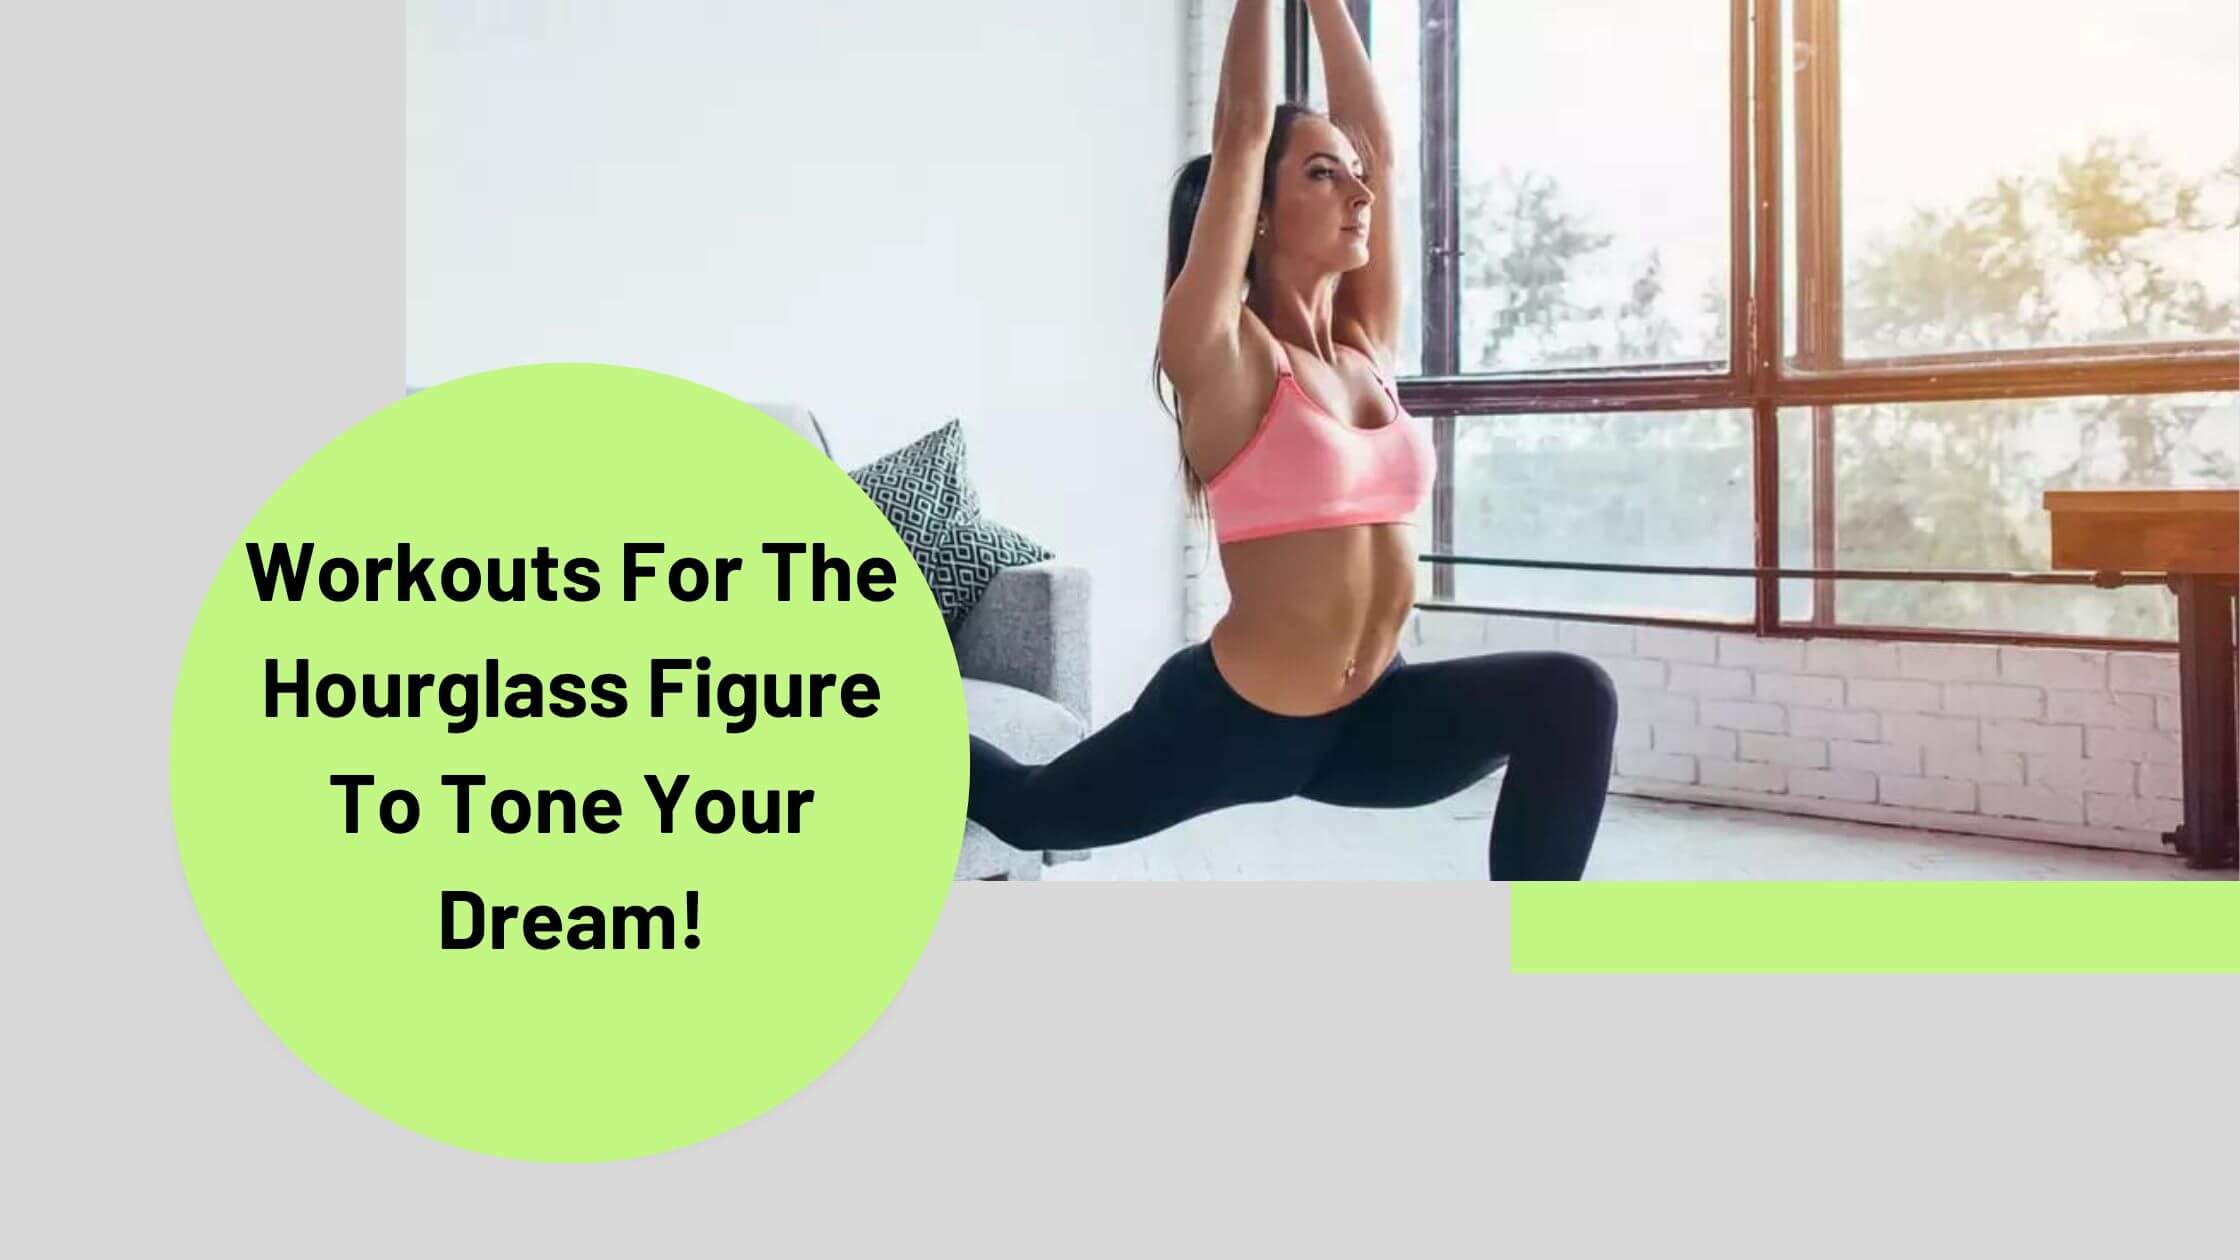 Workouts For The Hourglass Figure To Tone Your Dream!